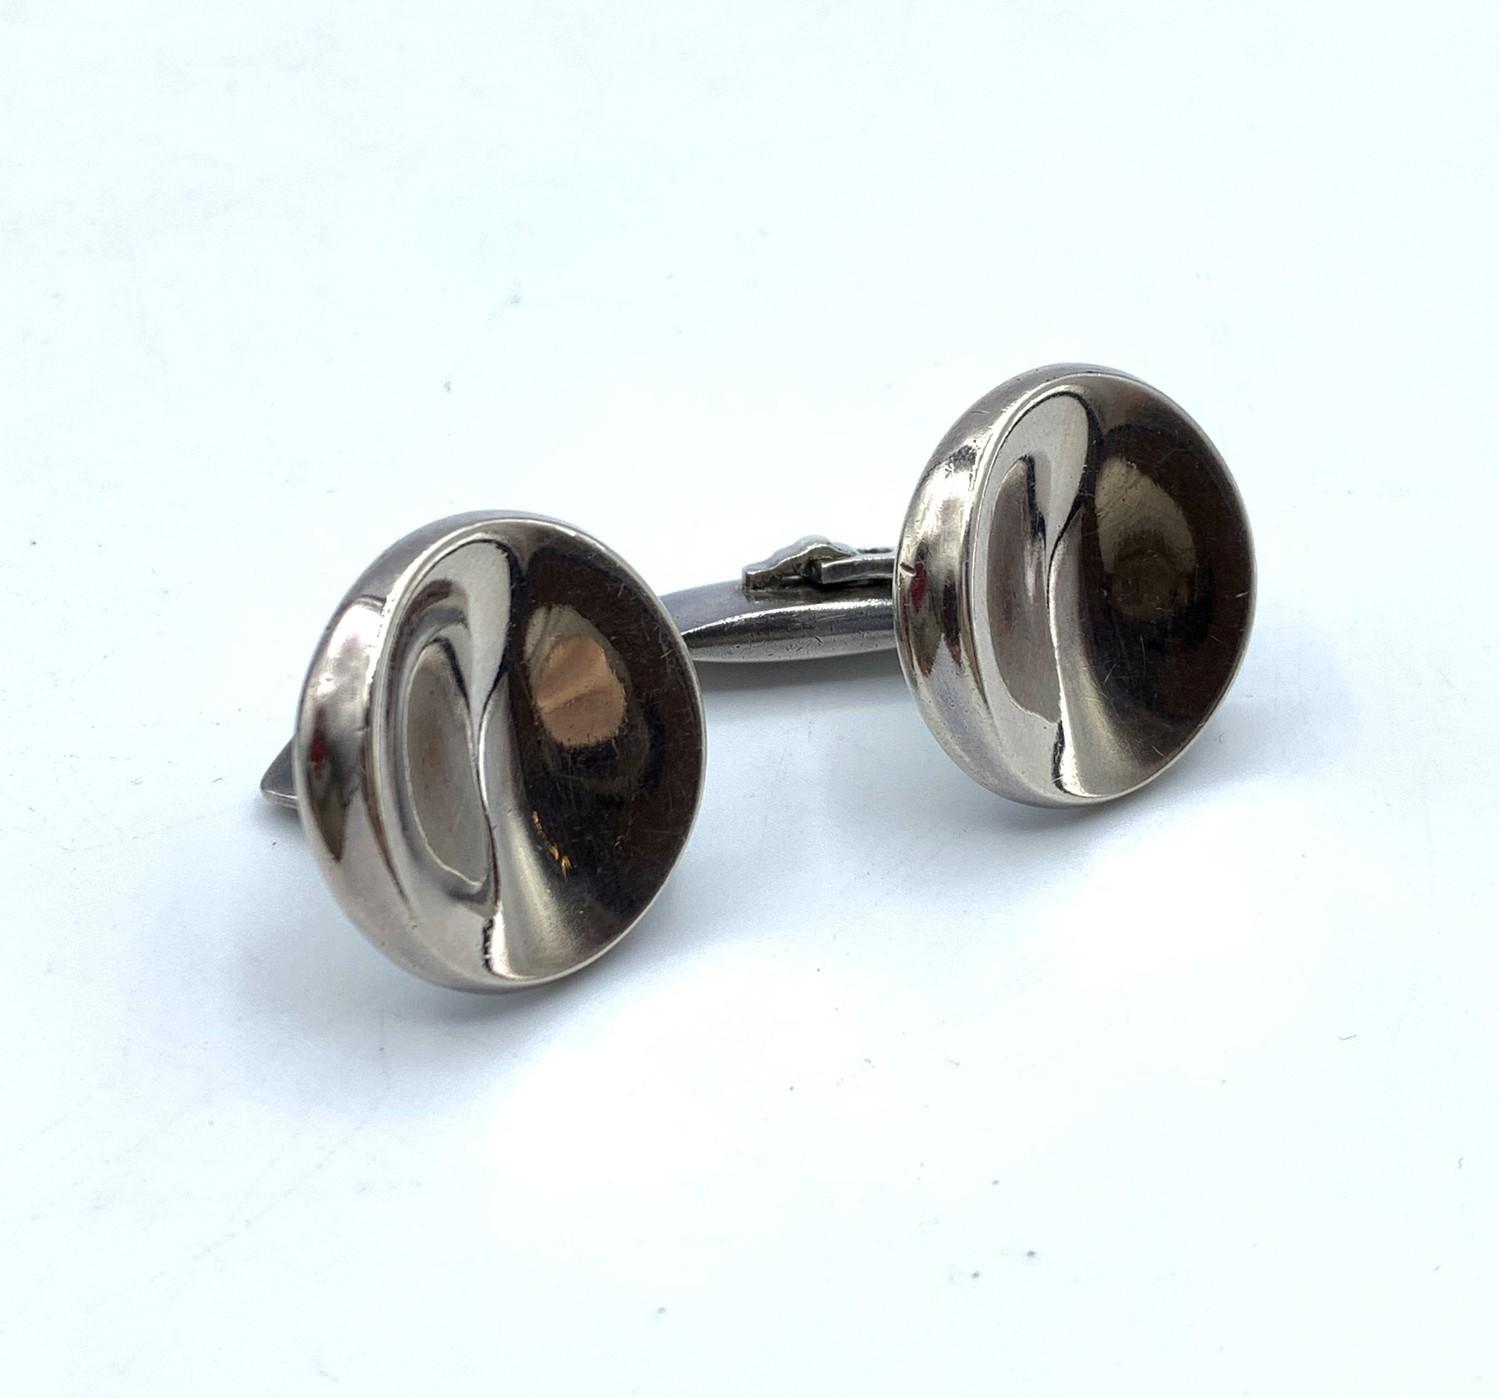 Pair of Georg Jensen Silver Cufflinks in original Box, weight 21.7g and size 25x30mm approx